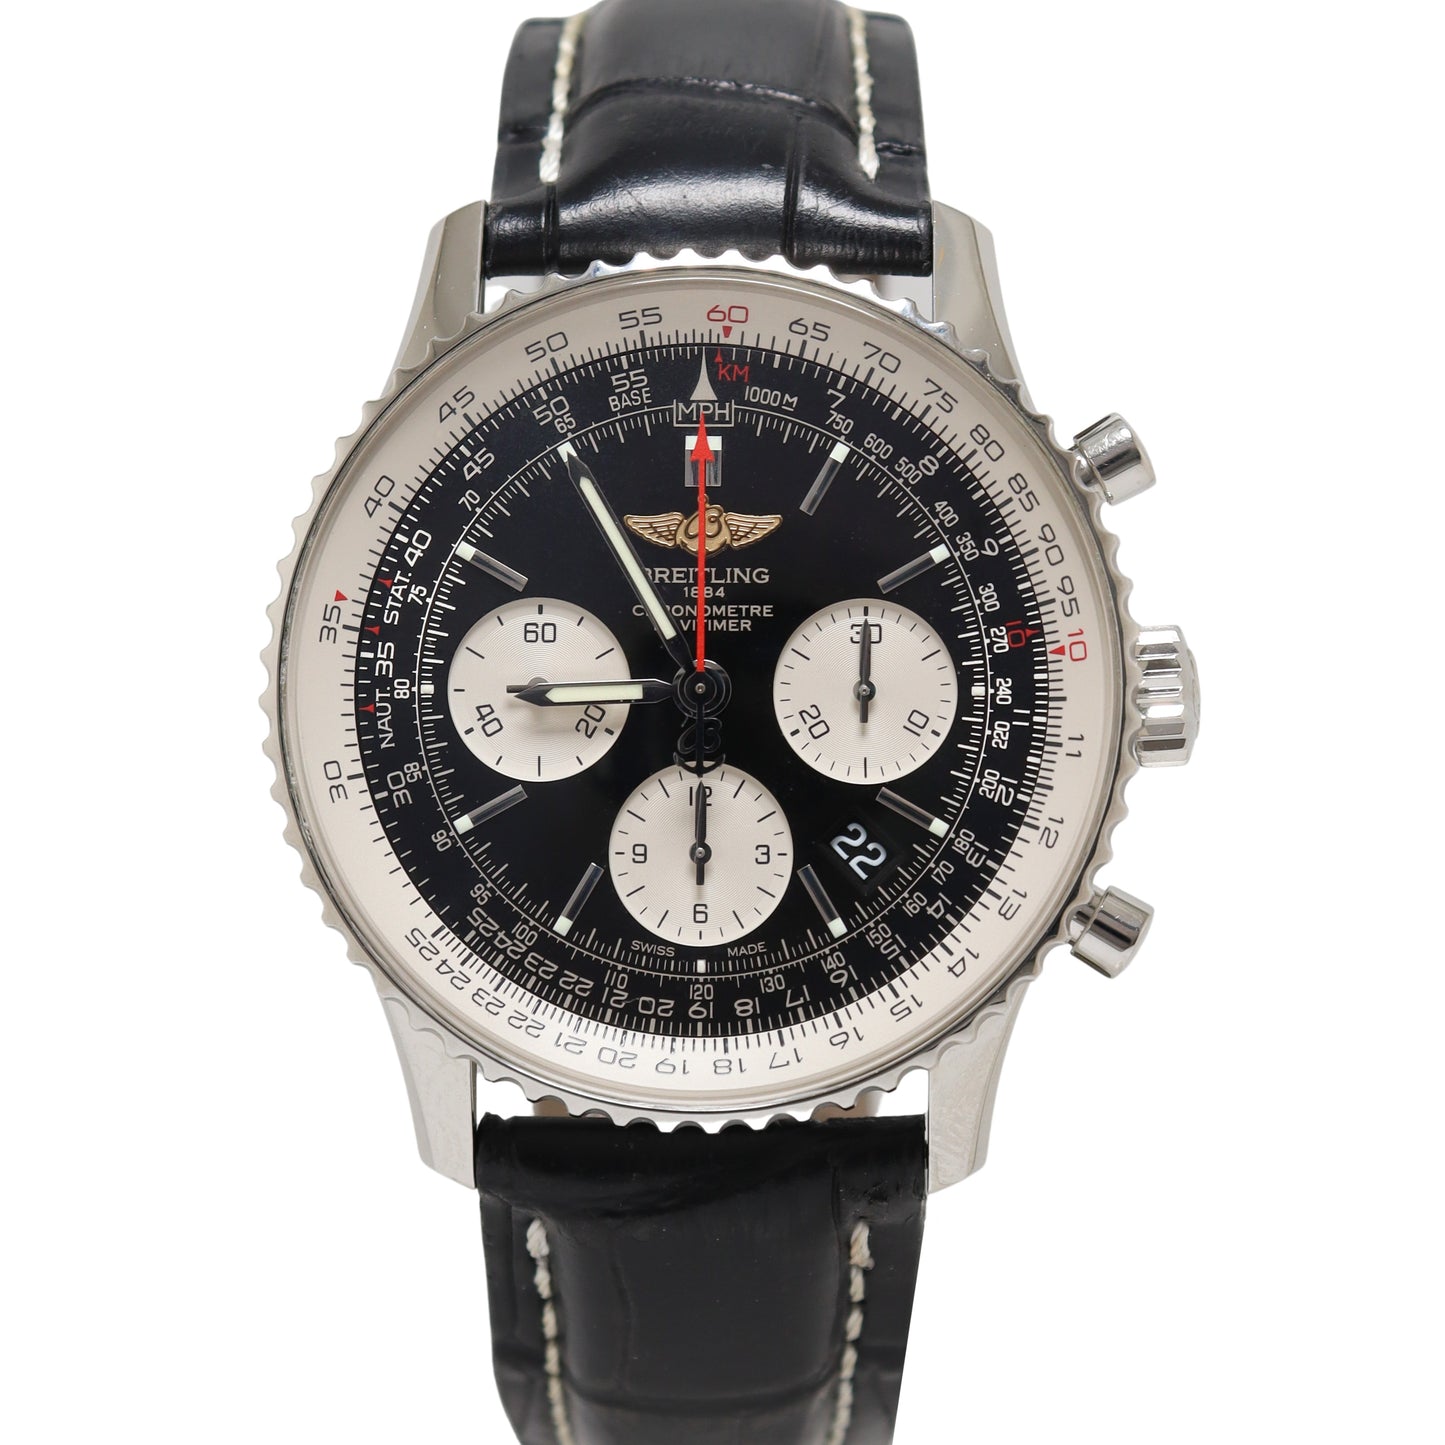 Breitling Navitimer Stainless Steel 42mm Black Chronograph Dial Watch Reference #: AB0120 - Happy Jewelers Fine Jewelry Lifetime Warranty